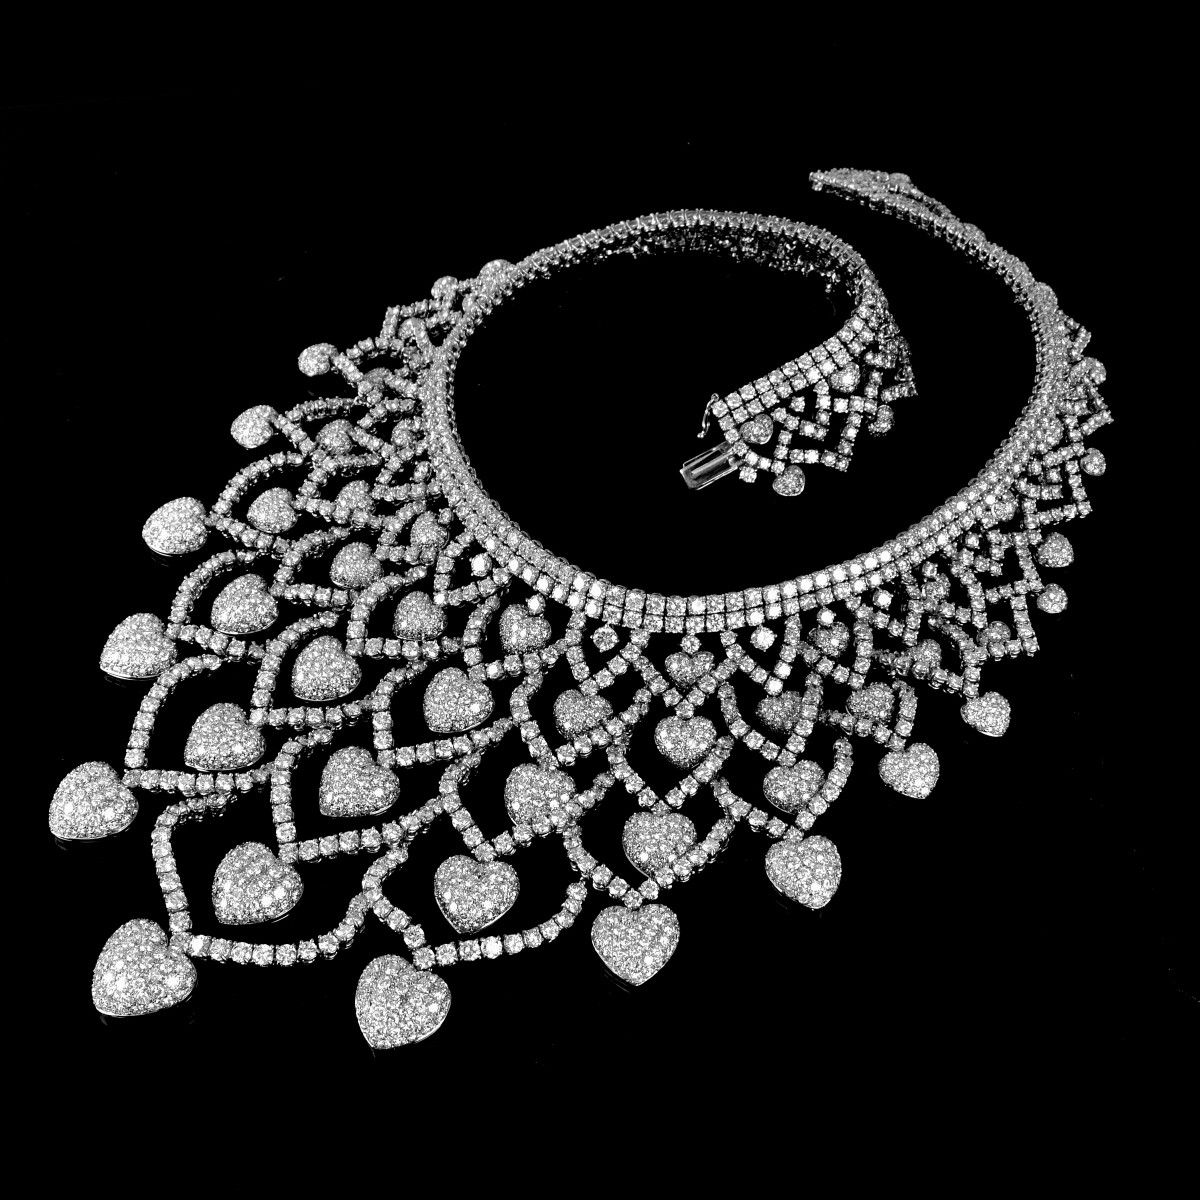 150.0ct Diamond and 18K Necklace